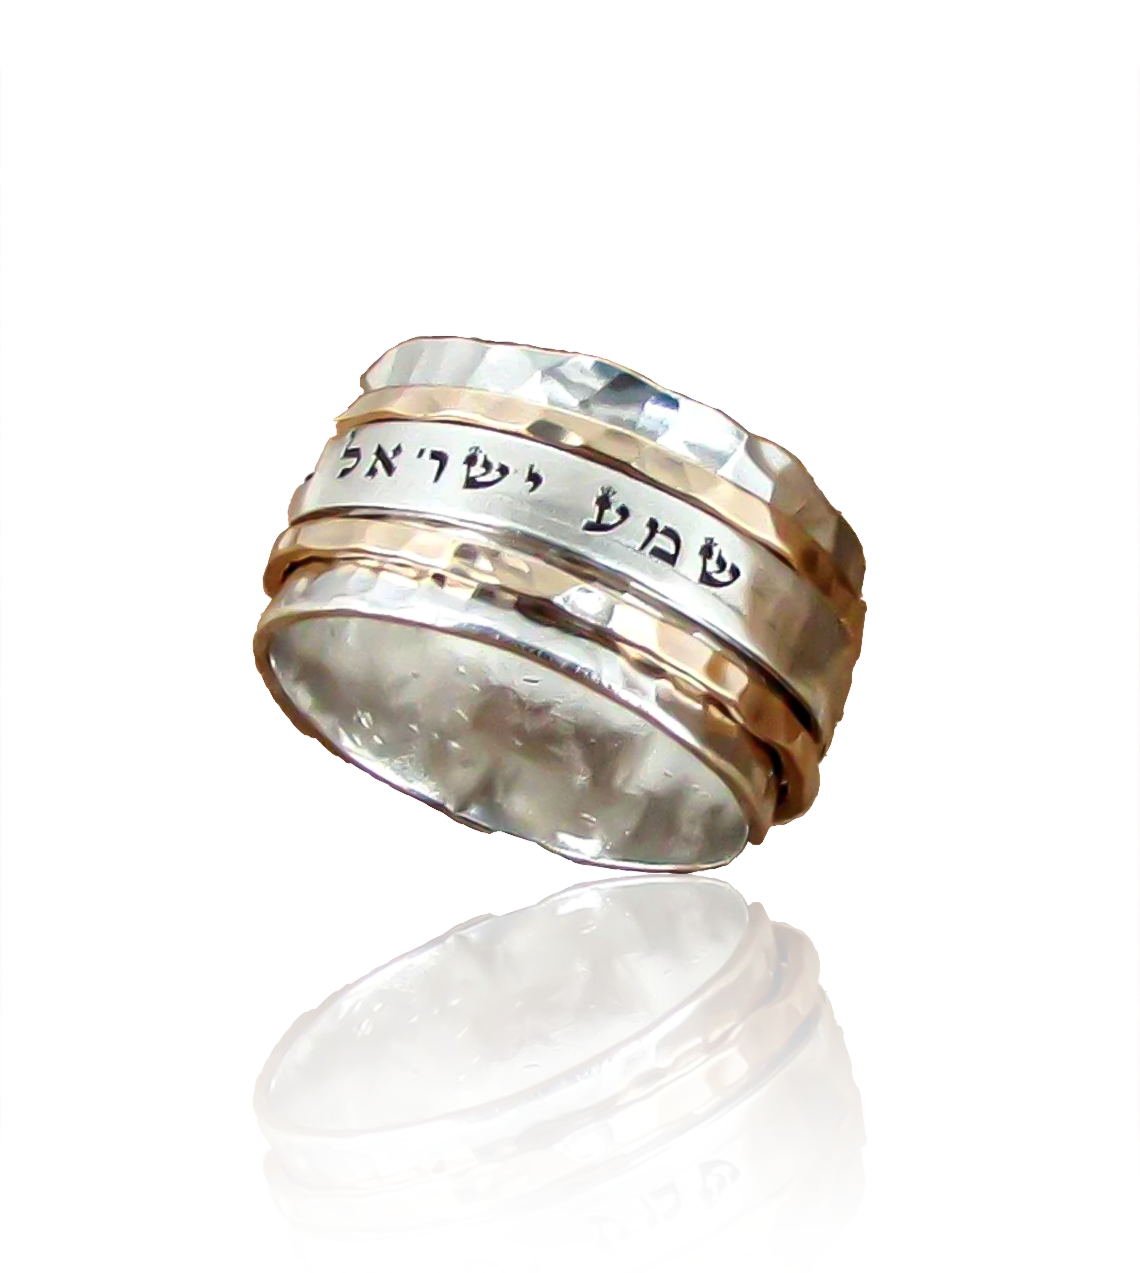 0004 Shema Israel Spinner Ring Personalized Hebrew Ring Judaica Israeli Ring Silver Jewish Jewelry Wedding Band Rin